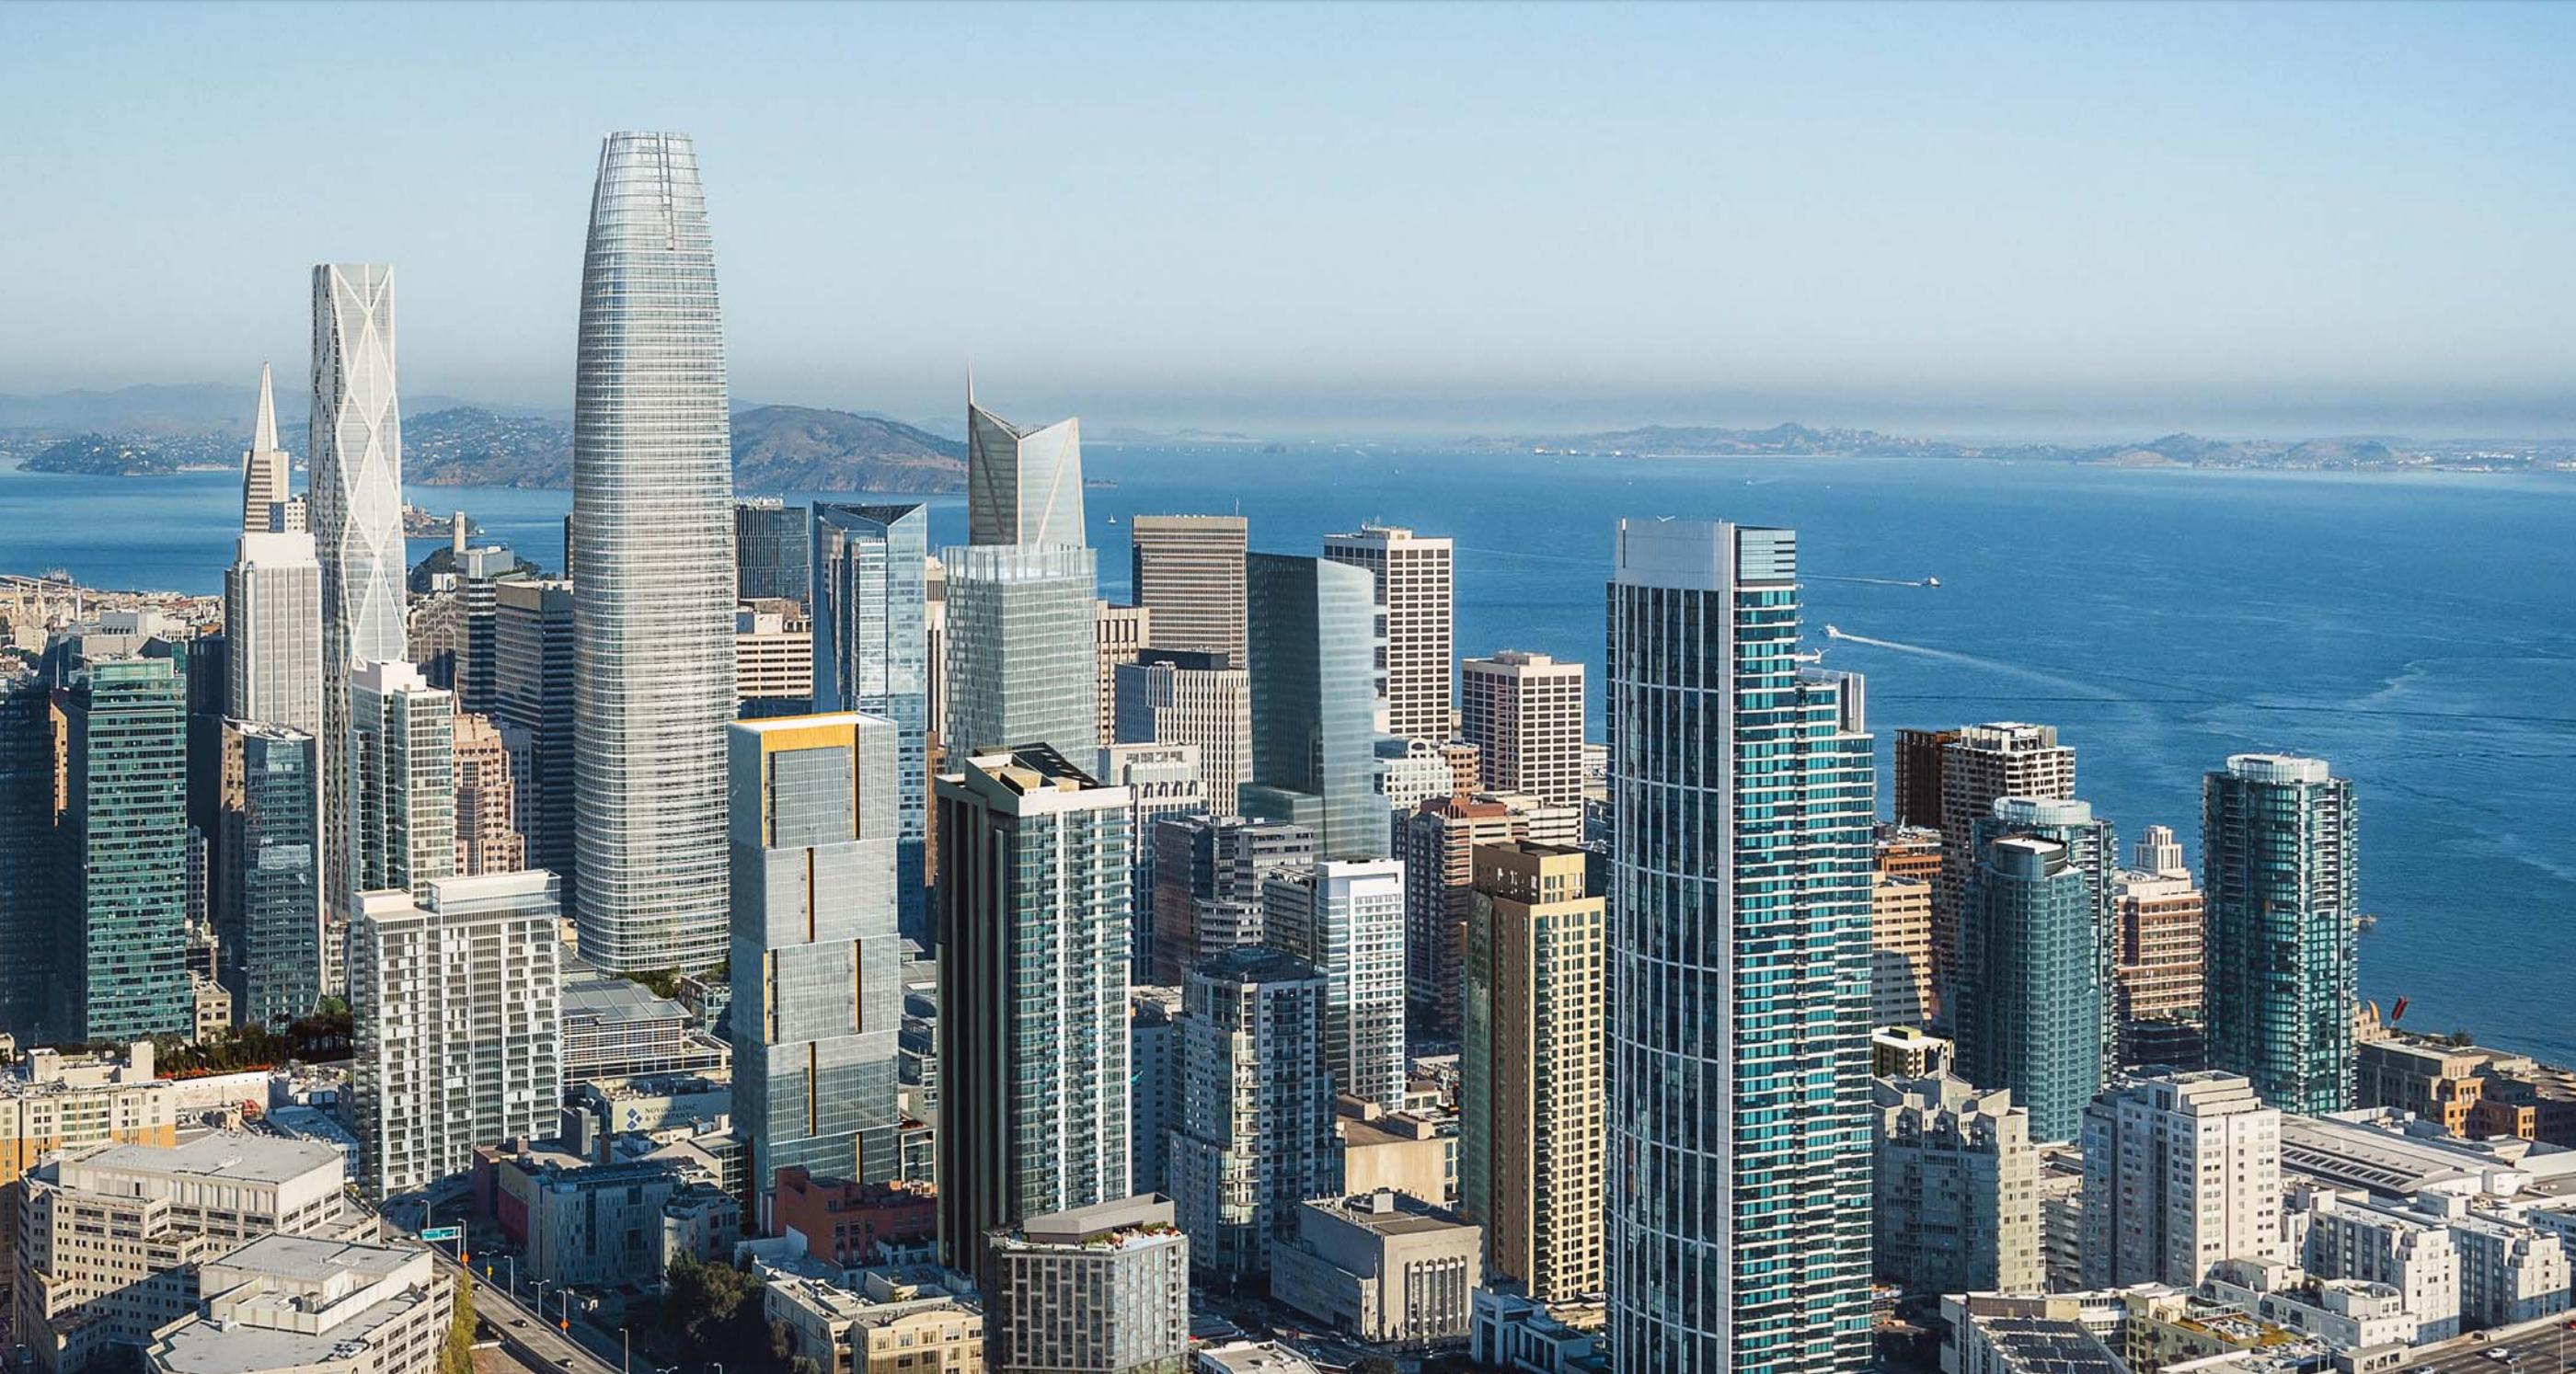 You guys want skyscrapers in SF? : sanfrancisco